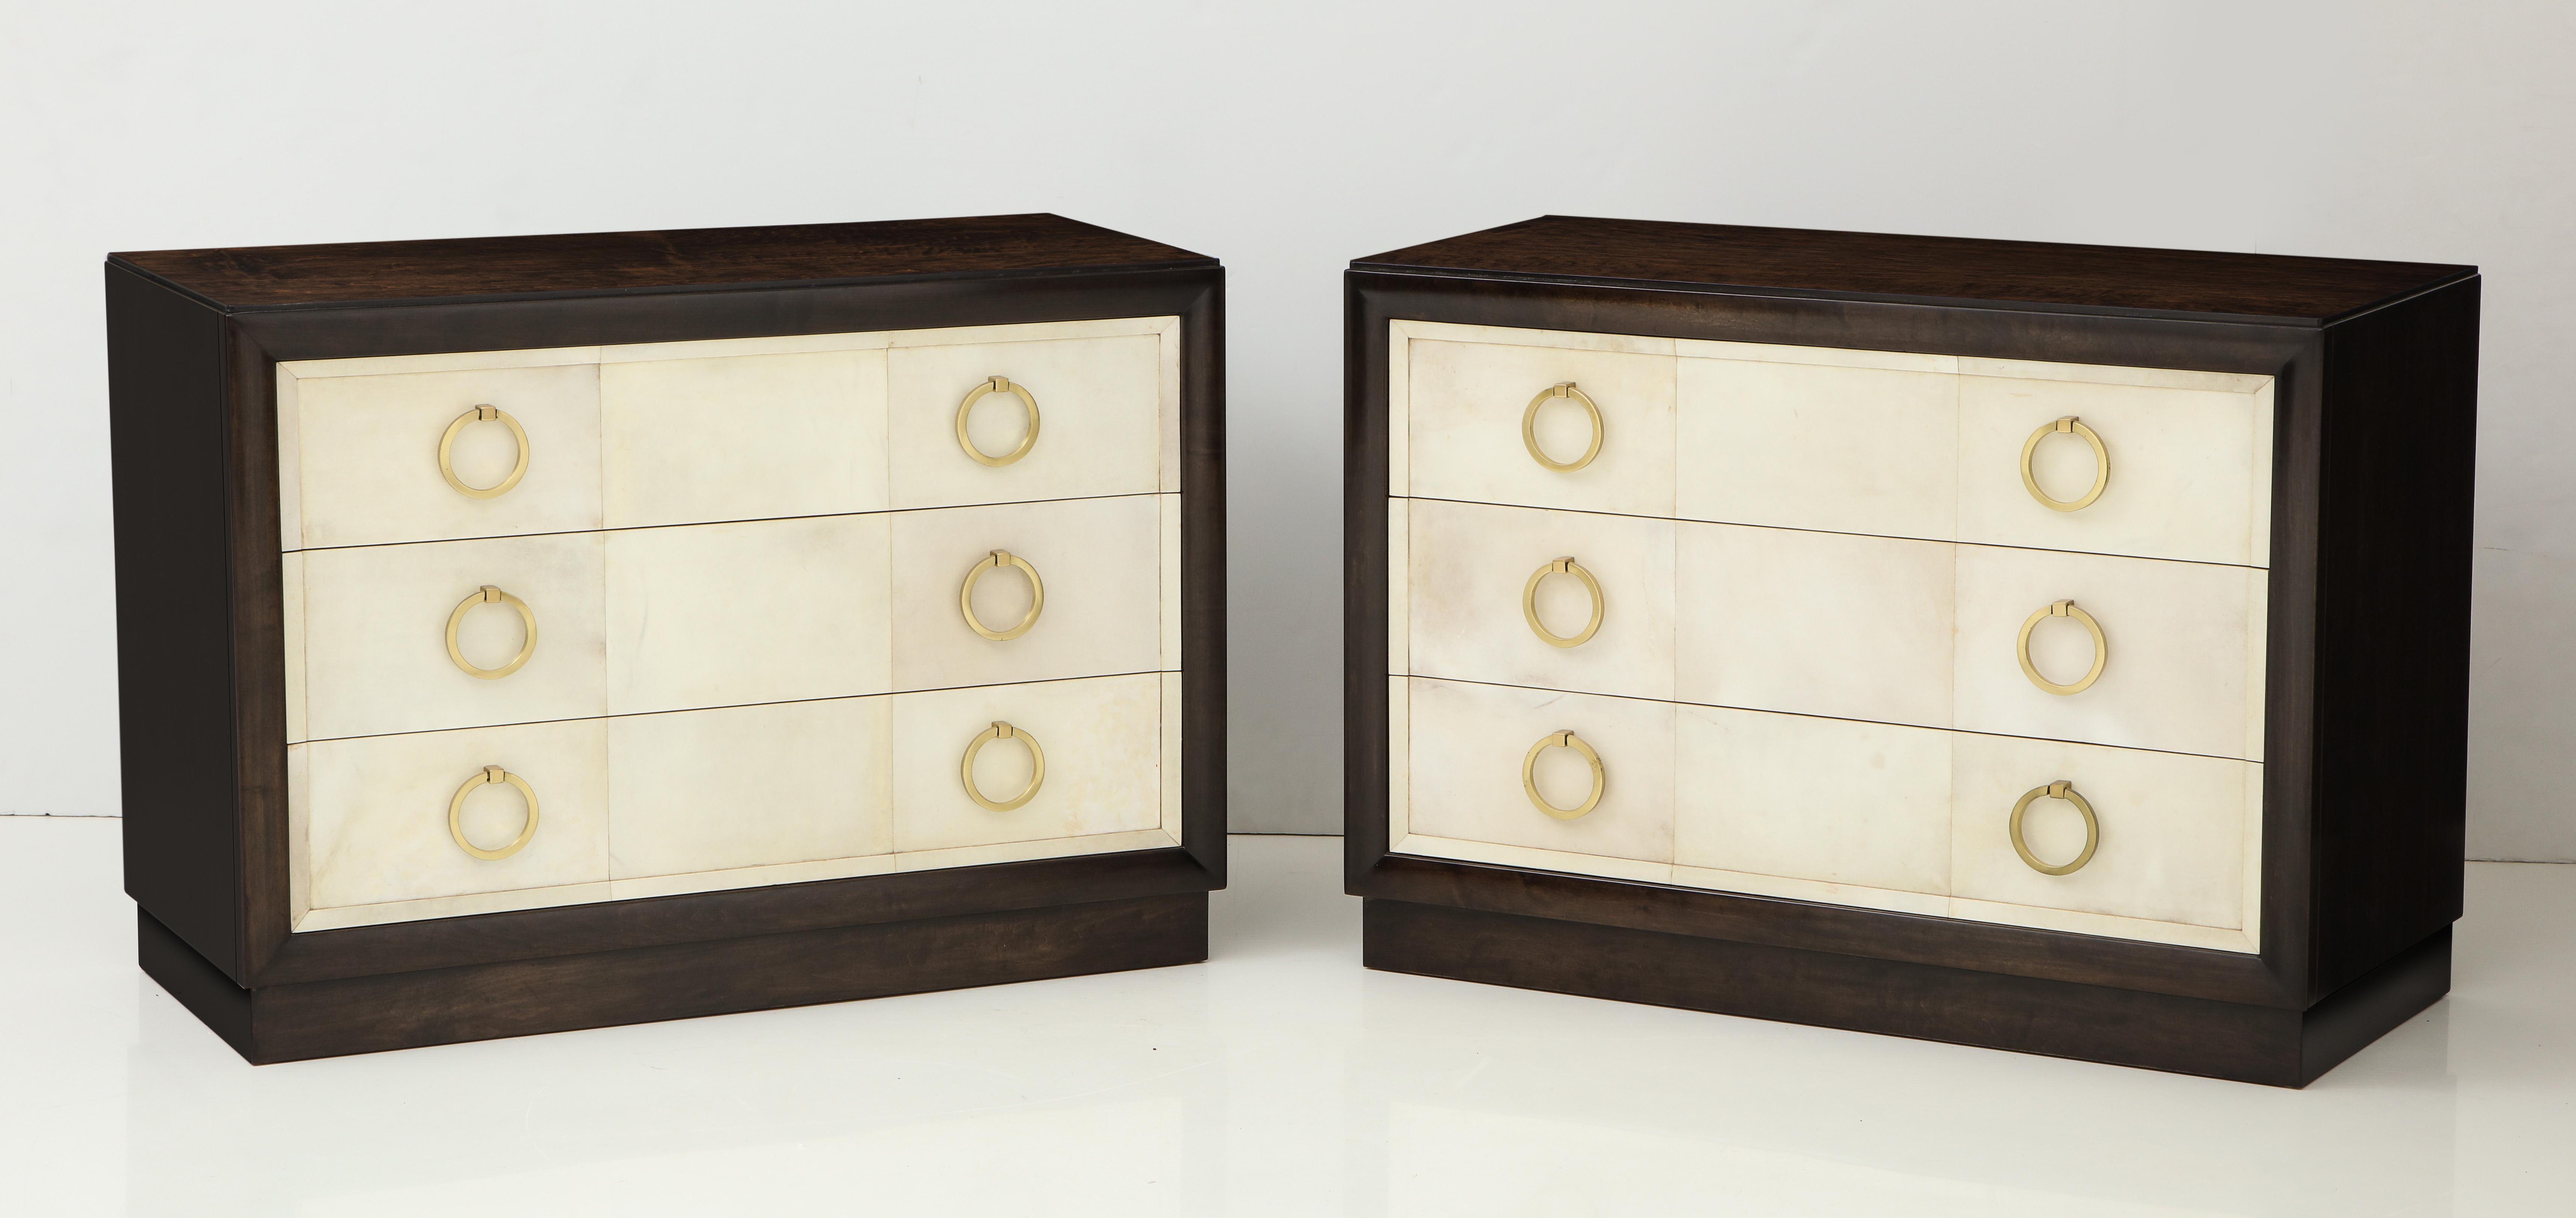 Pair of Exquisite Parchment Dressers by T H Robsjohn Gibbings (Lackiert)